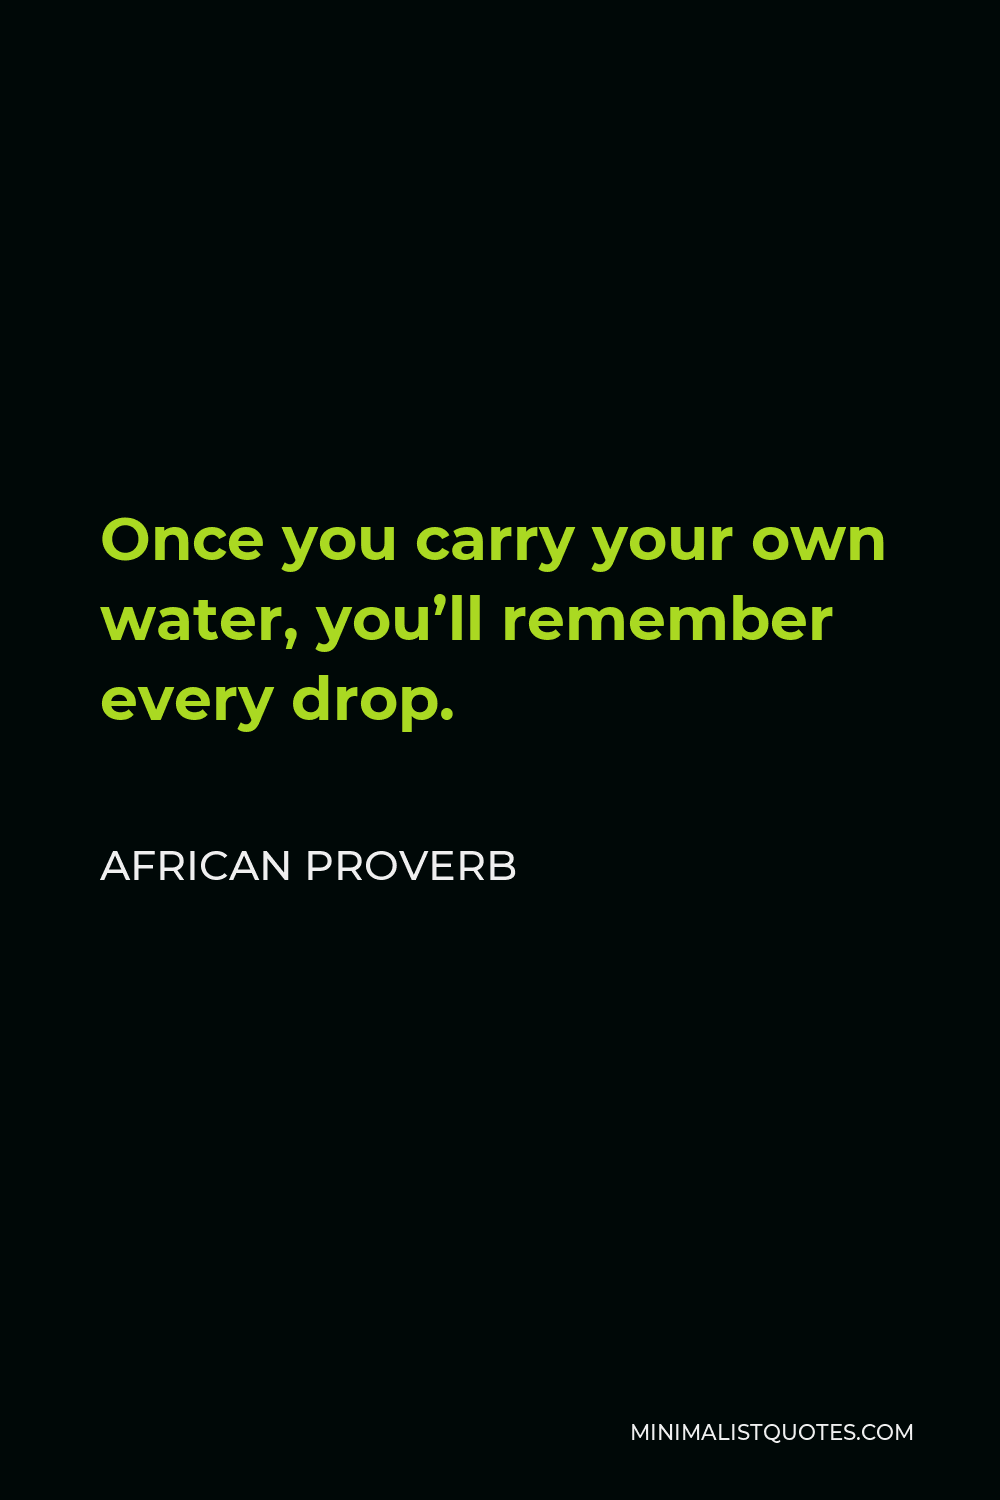 African Proverb Quote - Once you carry your own water, you’ll remember every drop.